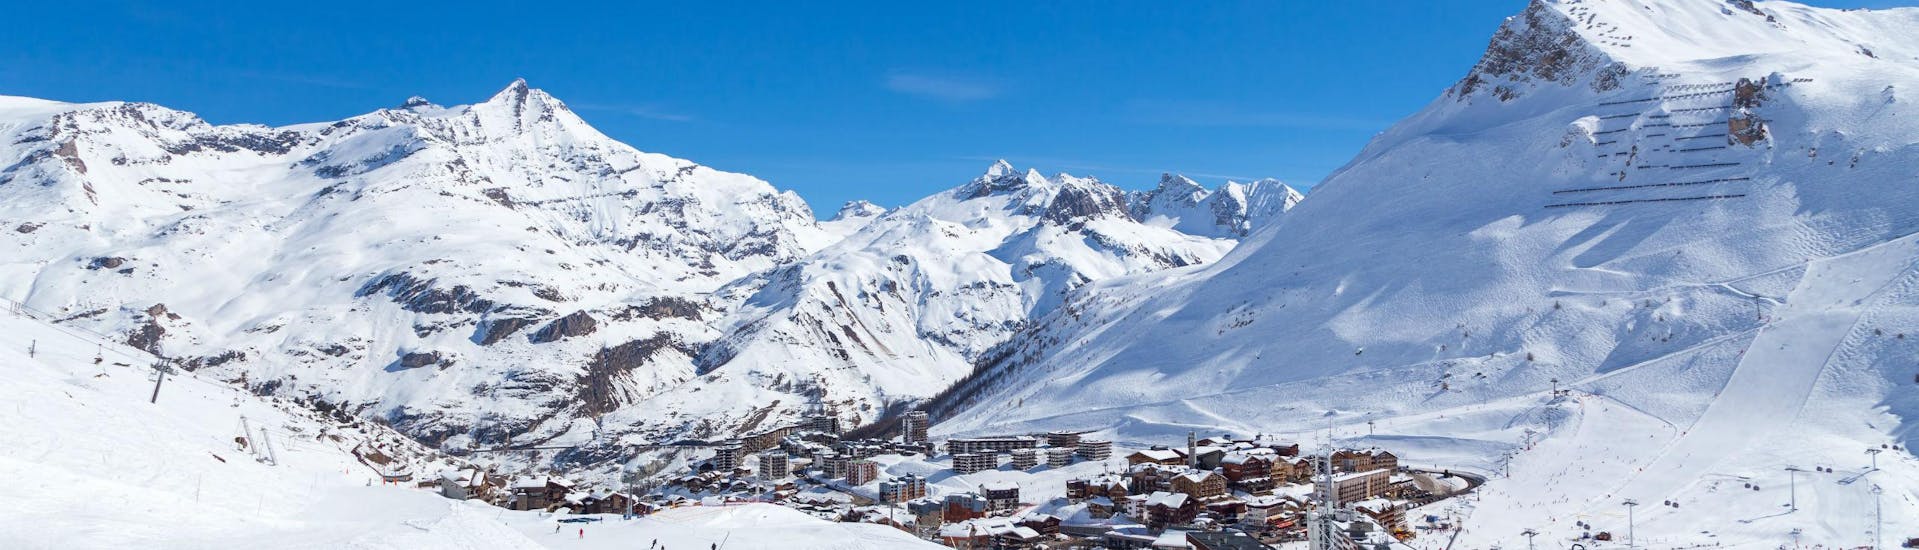 A view of the French ski resort of Tignes under the clear blue sky with its many pistes used by the local ski schools to carry out their ski lessons.